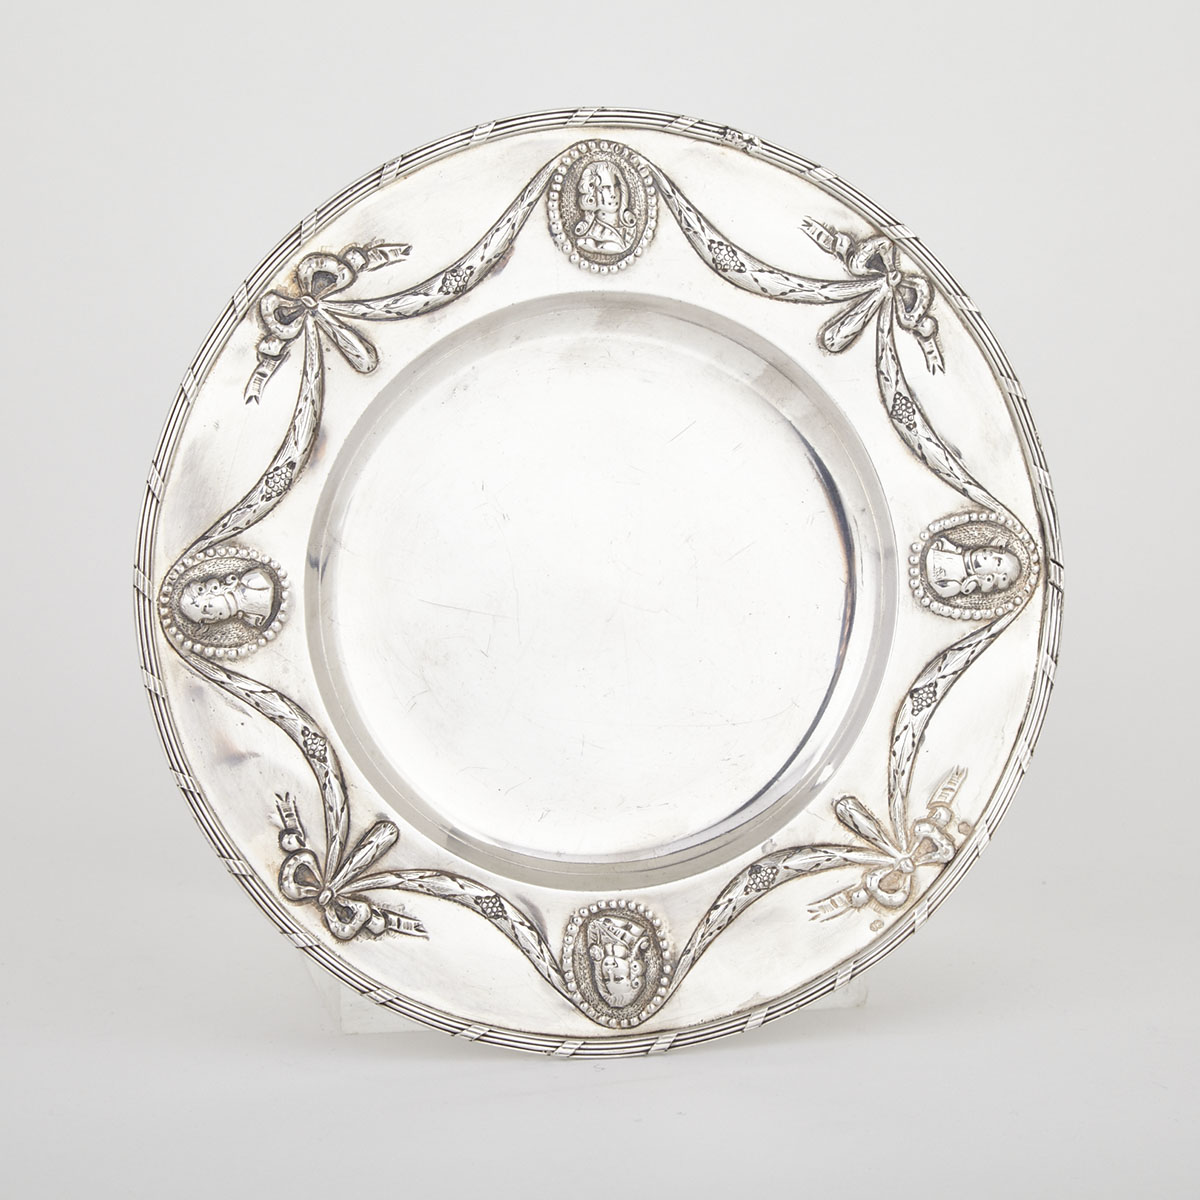 Austrian Silver Plate, Vienna, late 19th/early 20th century